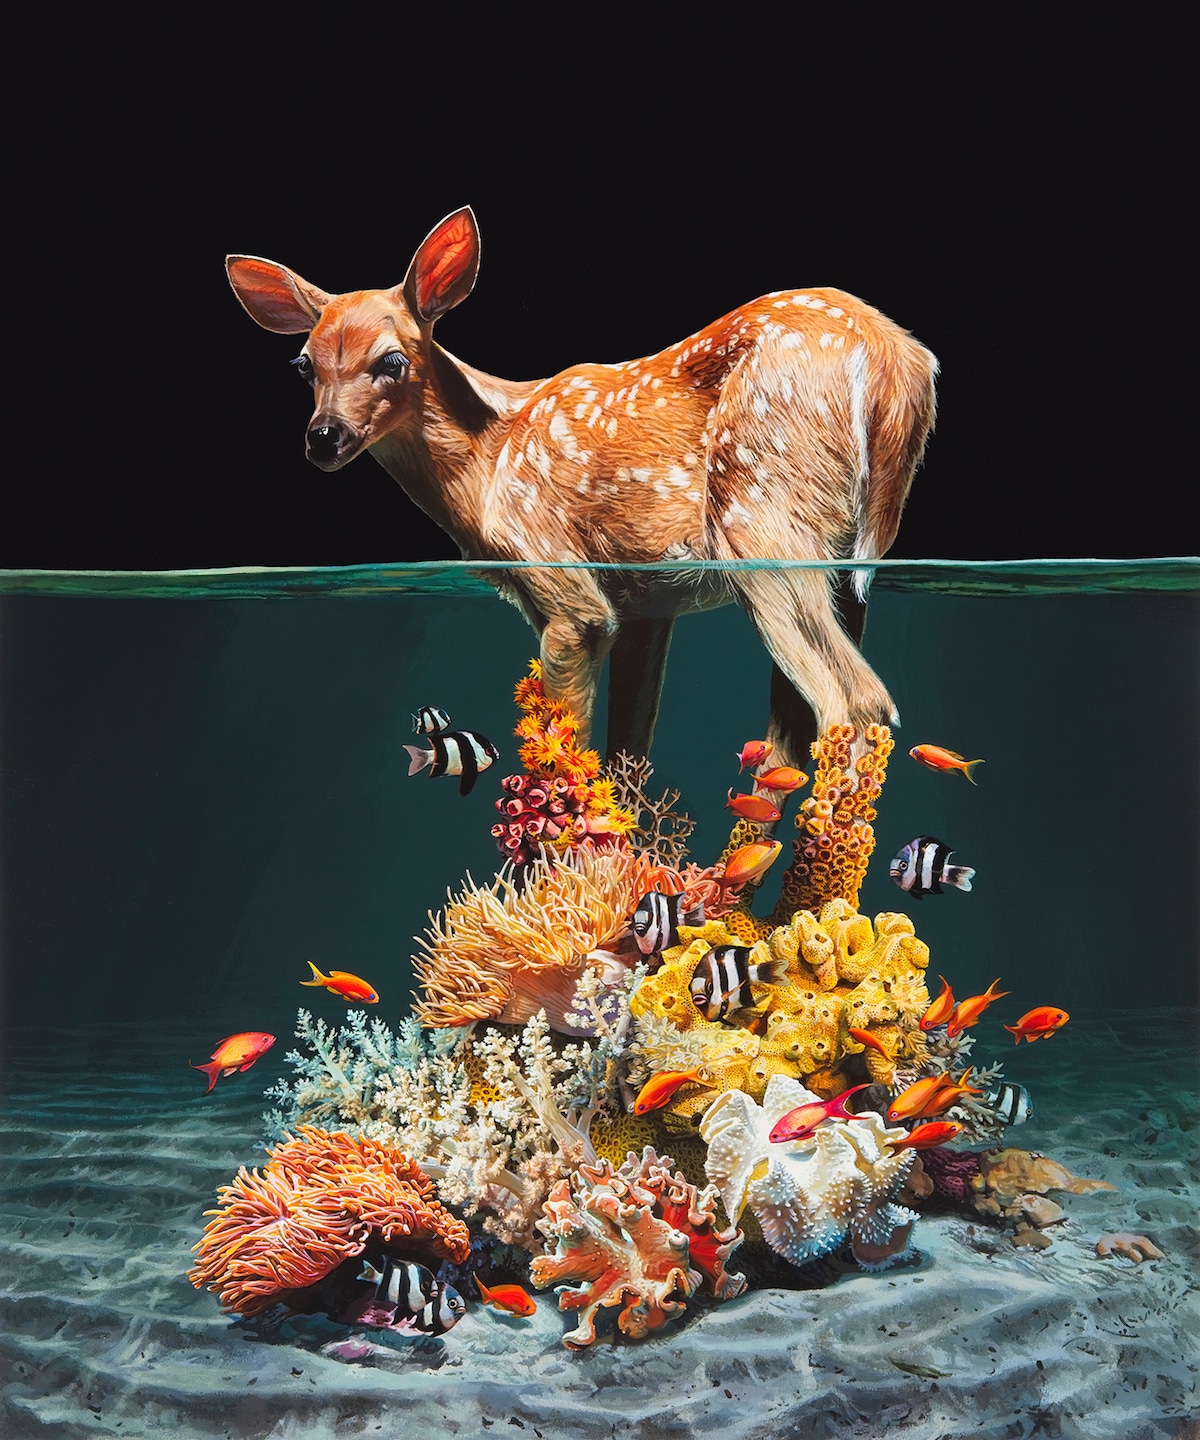 Paintings Depict Land Animals Half-Submerged in Rising Sea Water